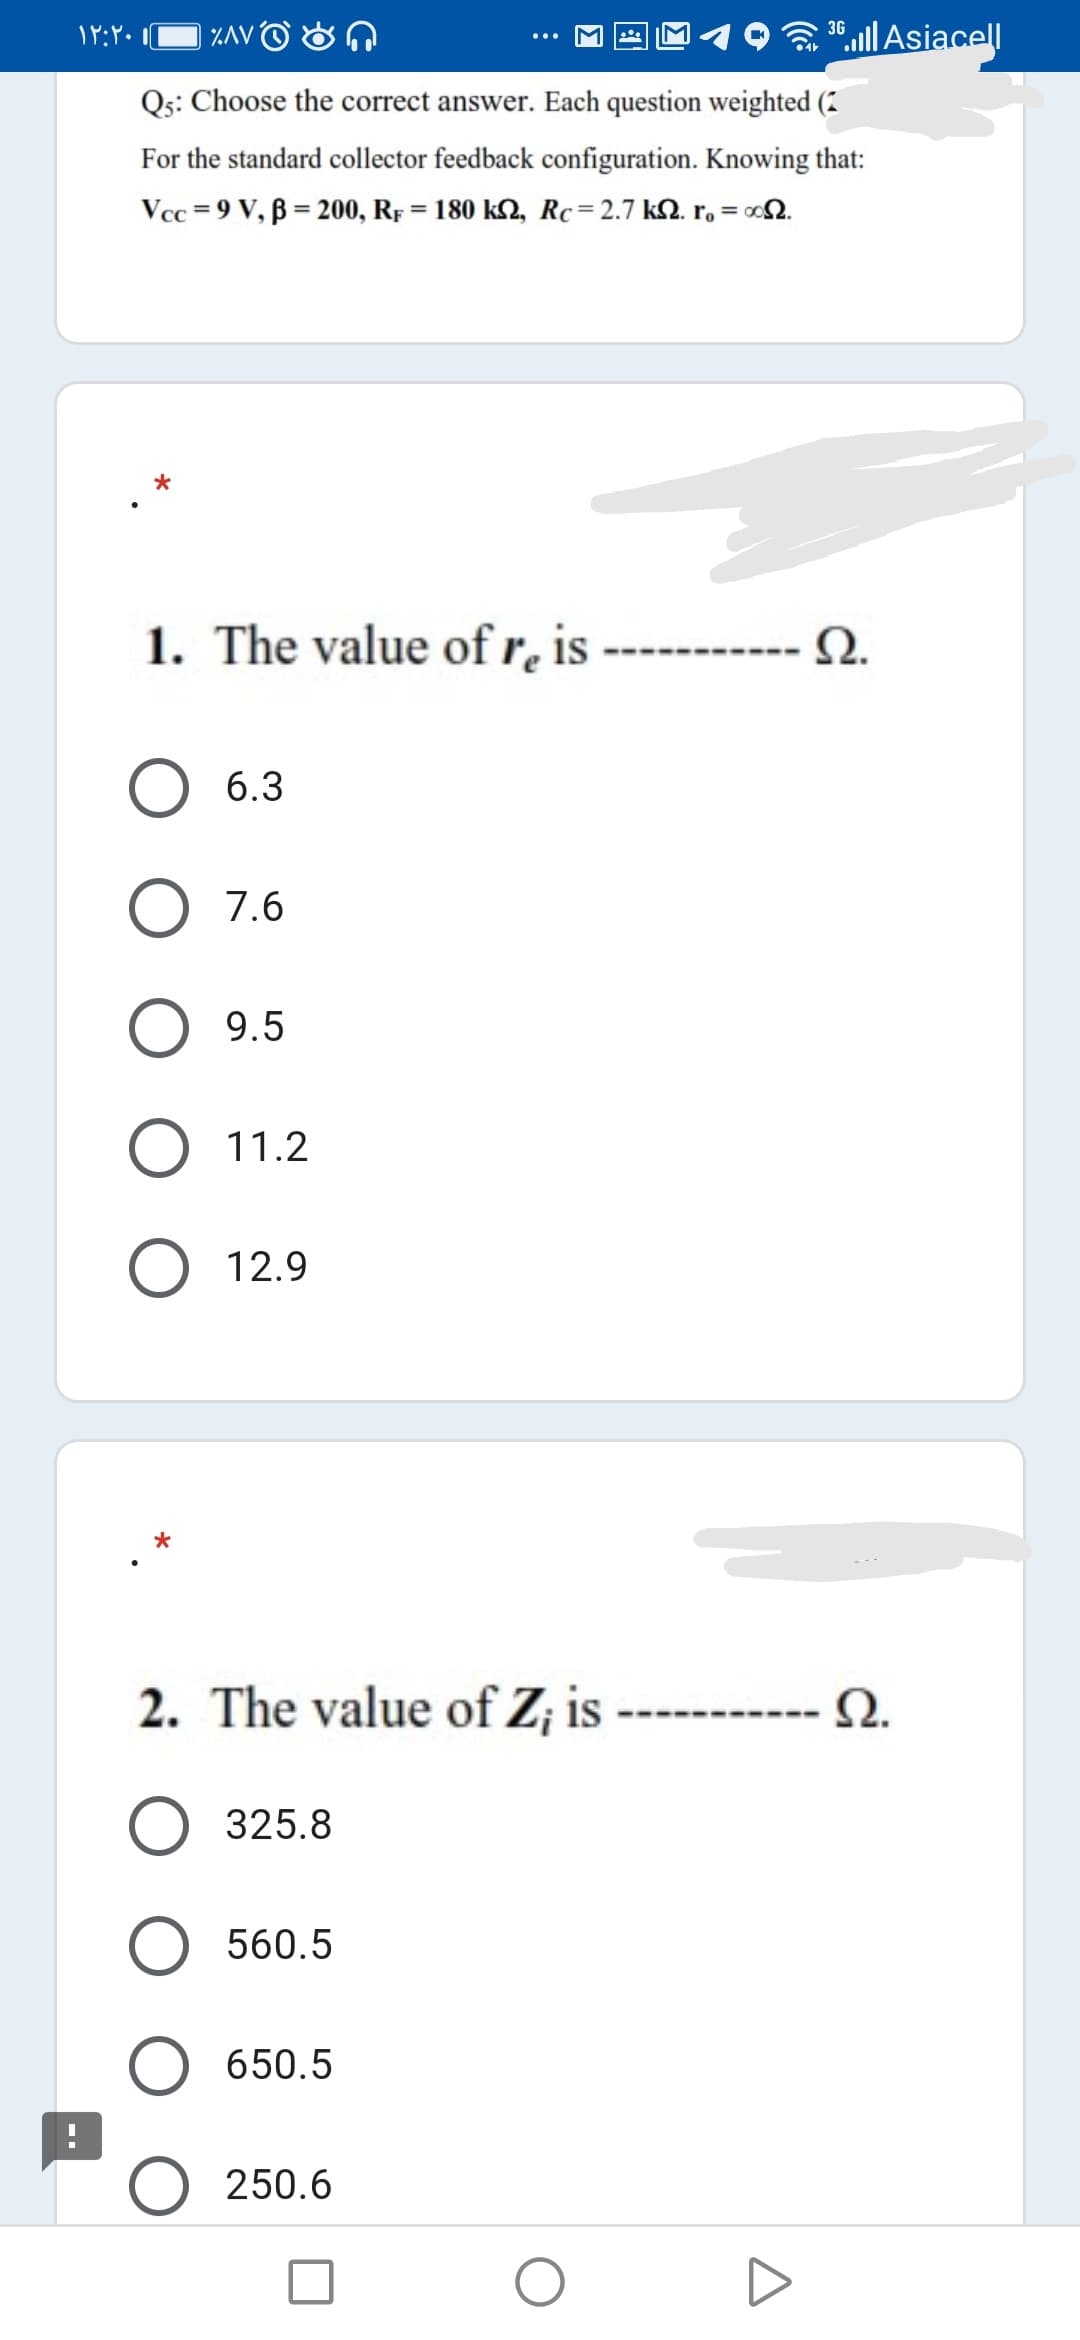 Qs: Choose the correct answer. Each question weighted (2
For the standard collector feedback configuration. Knowing that:
Vcc = 9 V, ß = 200, RF
= 180 k2, Rc=2.7 k2. r, = o2.
%3D
%3D
